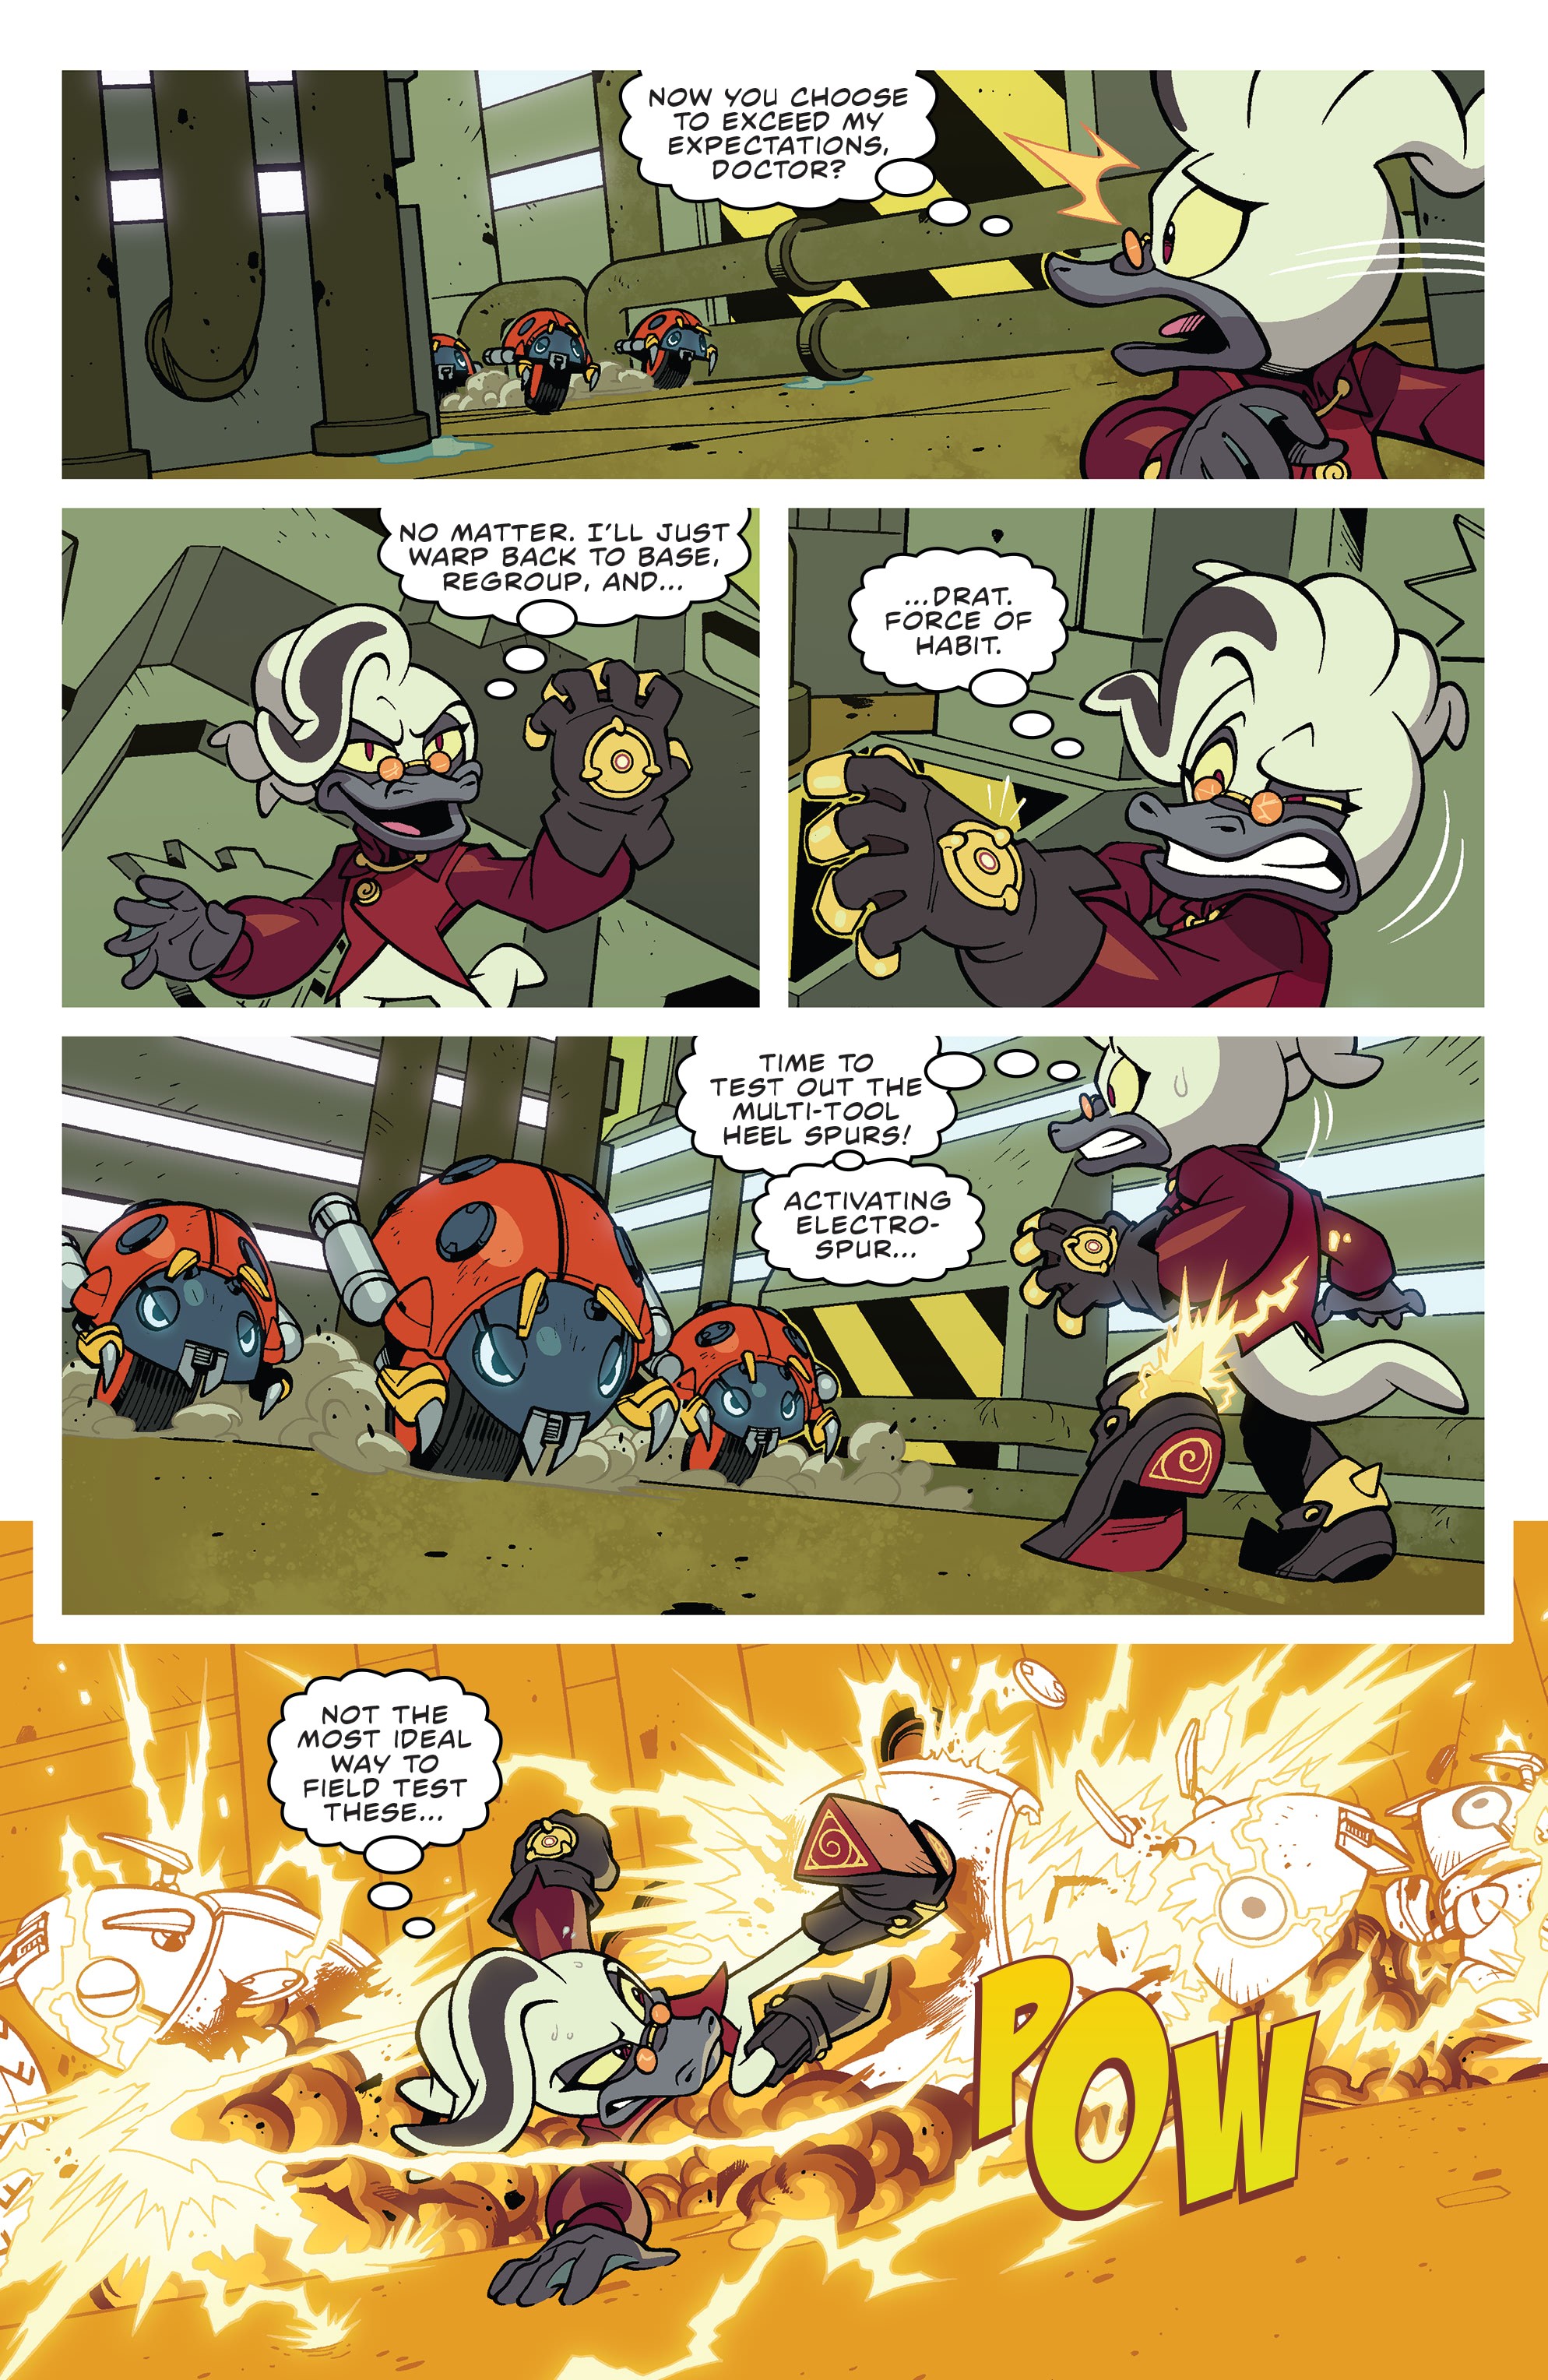 Sonic The Hedgehog: Bad Guys (2020): Chapter 1 - Page 4